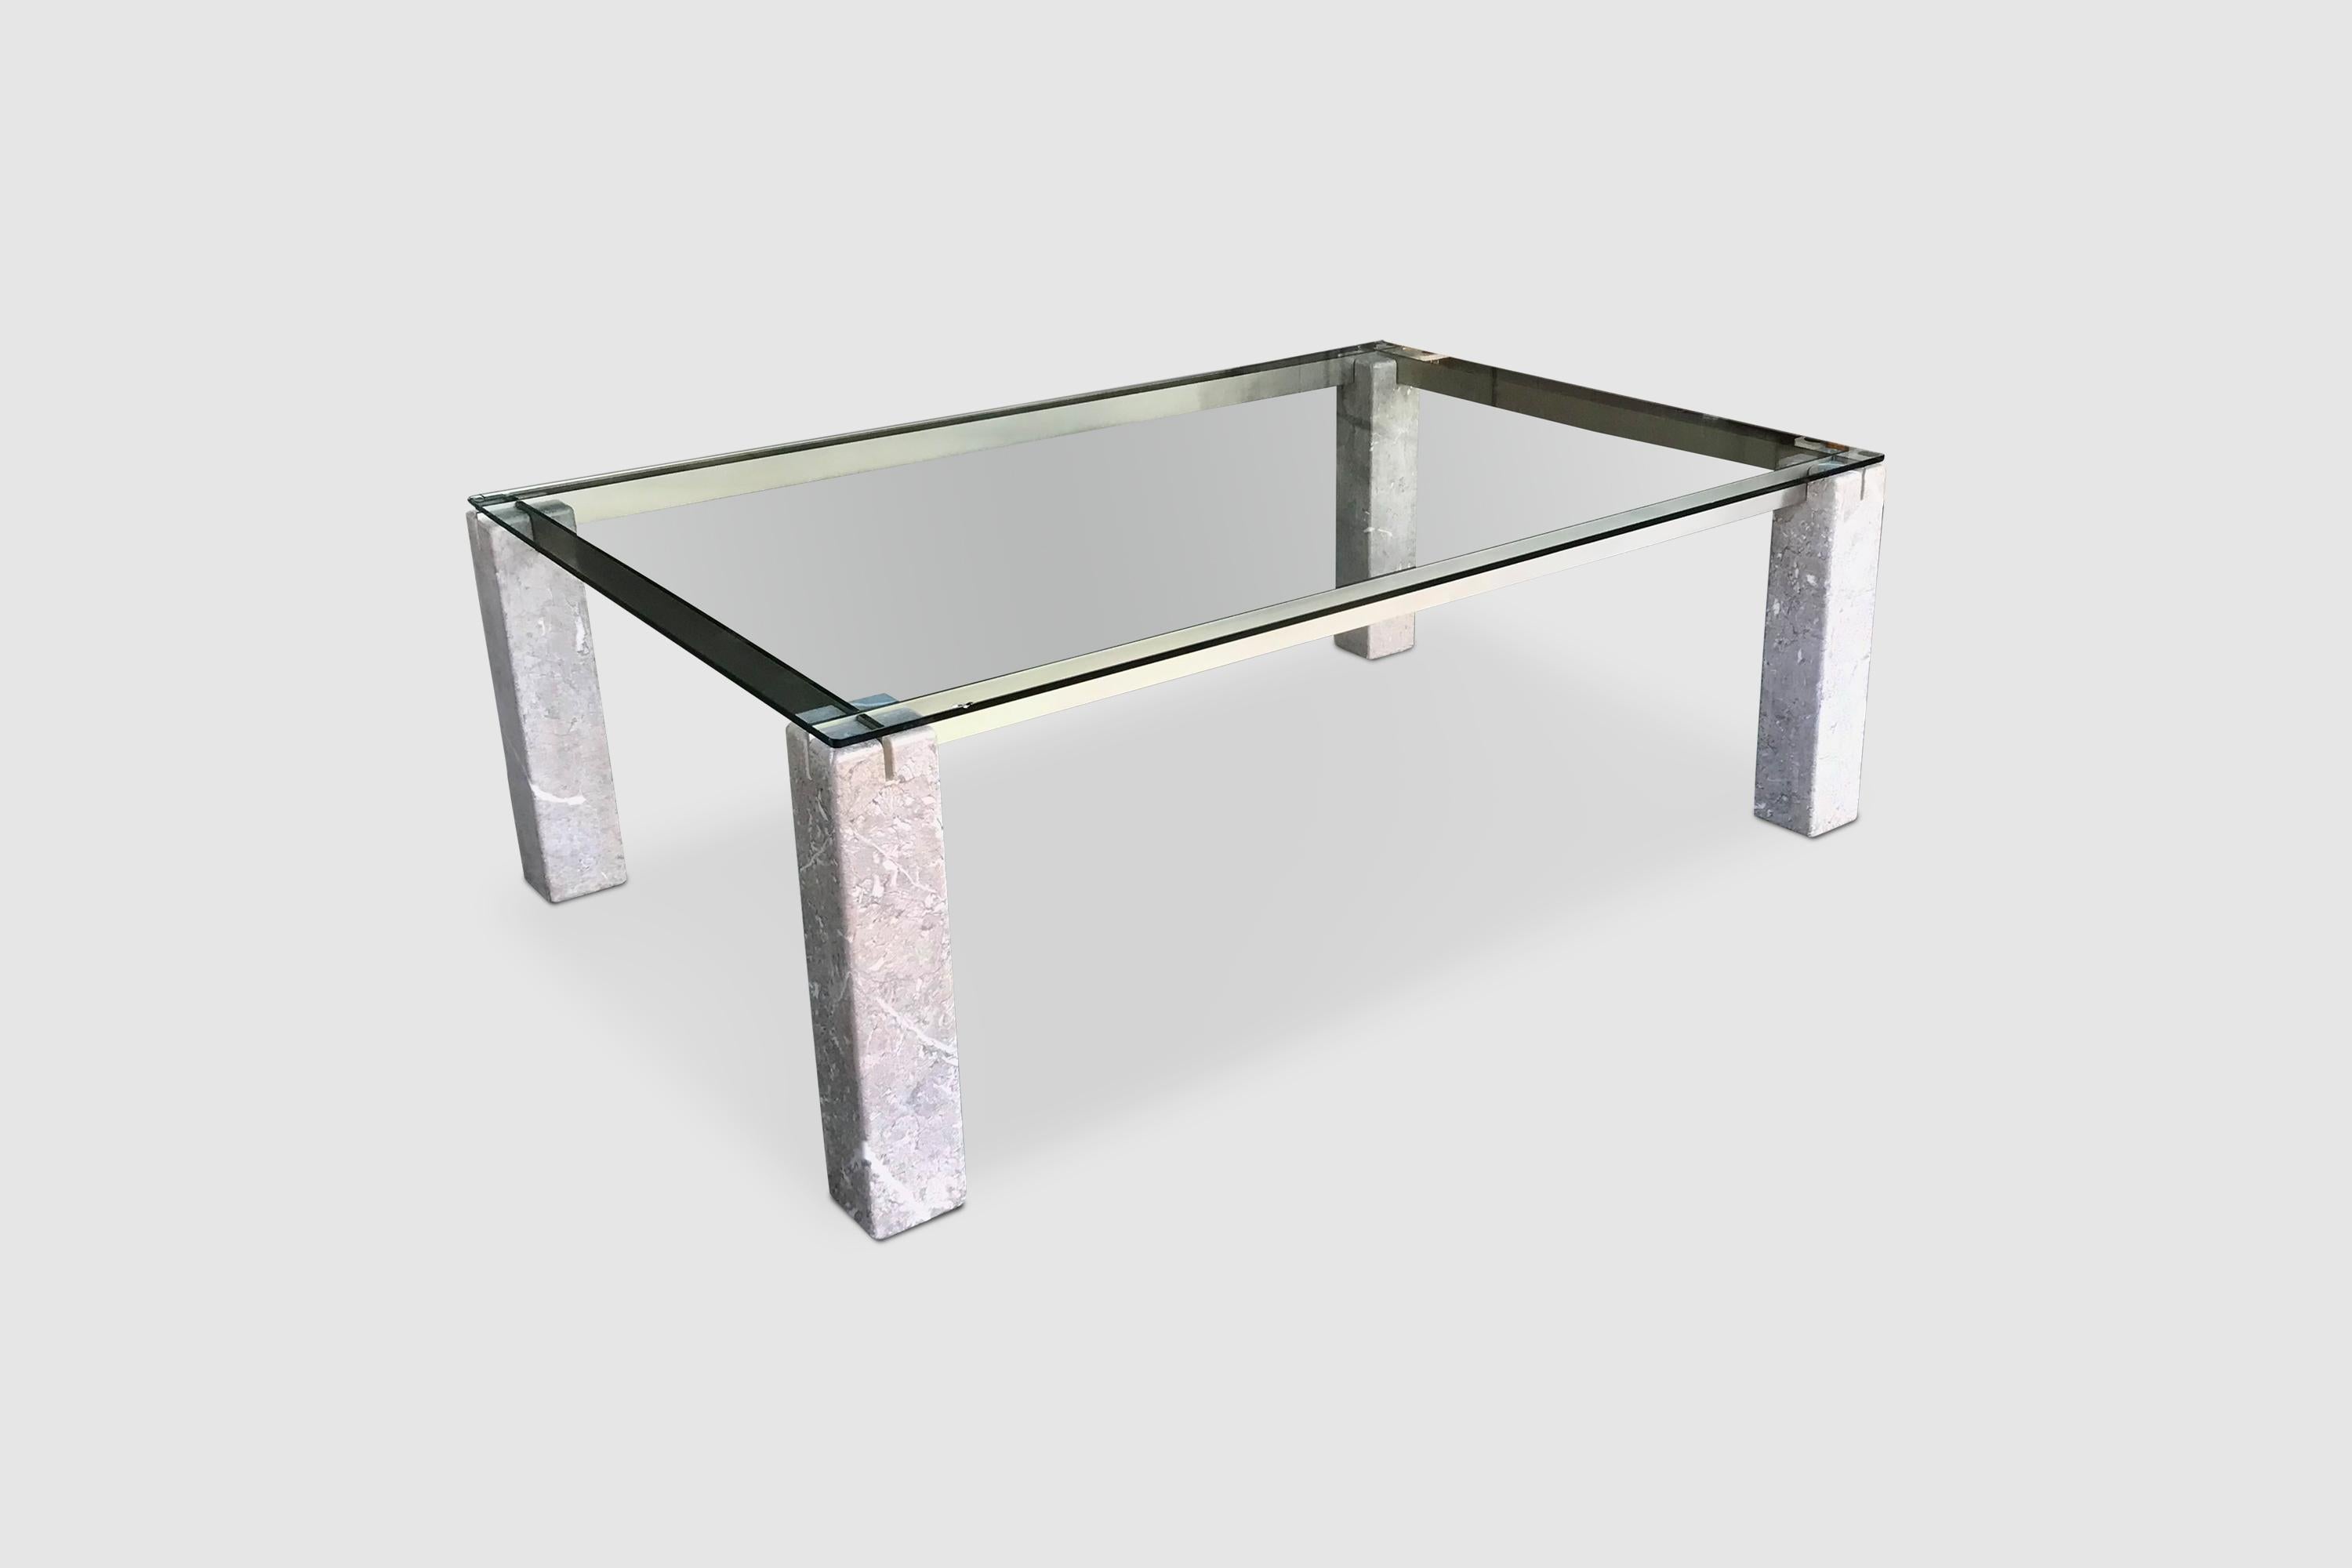 Italian Faraone Glass and Marble Dining Table by Renato Polidori for Skipper Italy 1980s For Sale